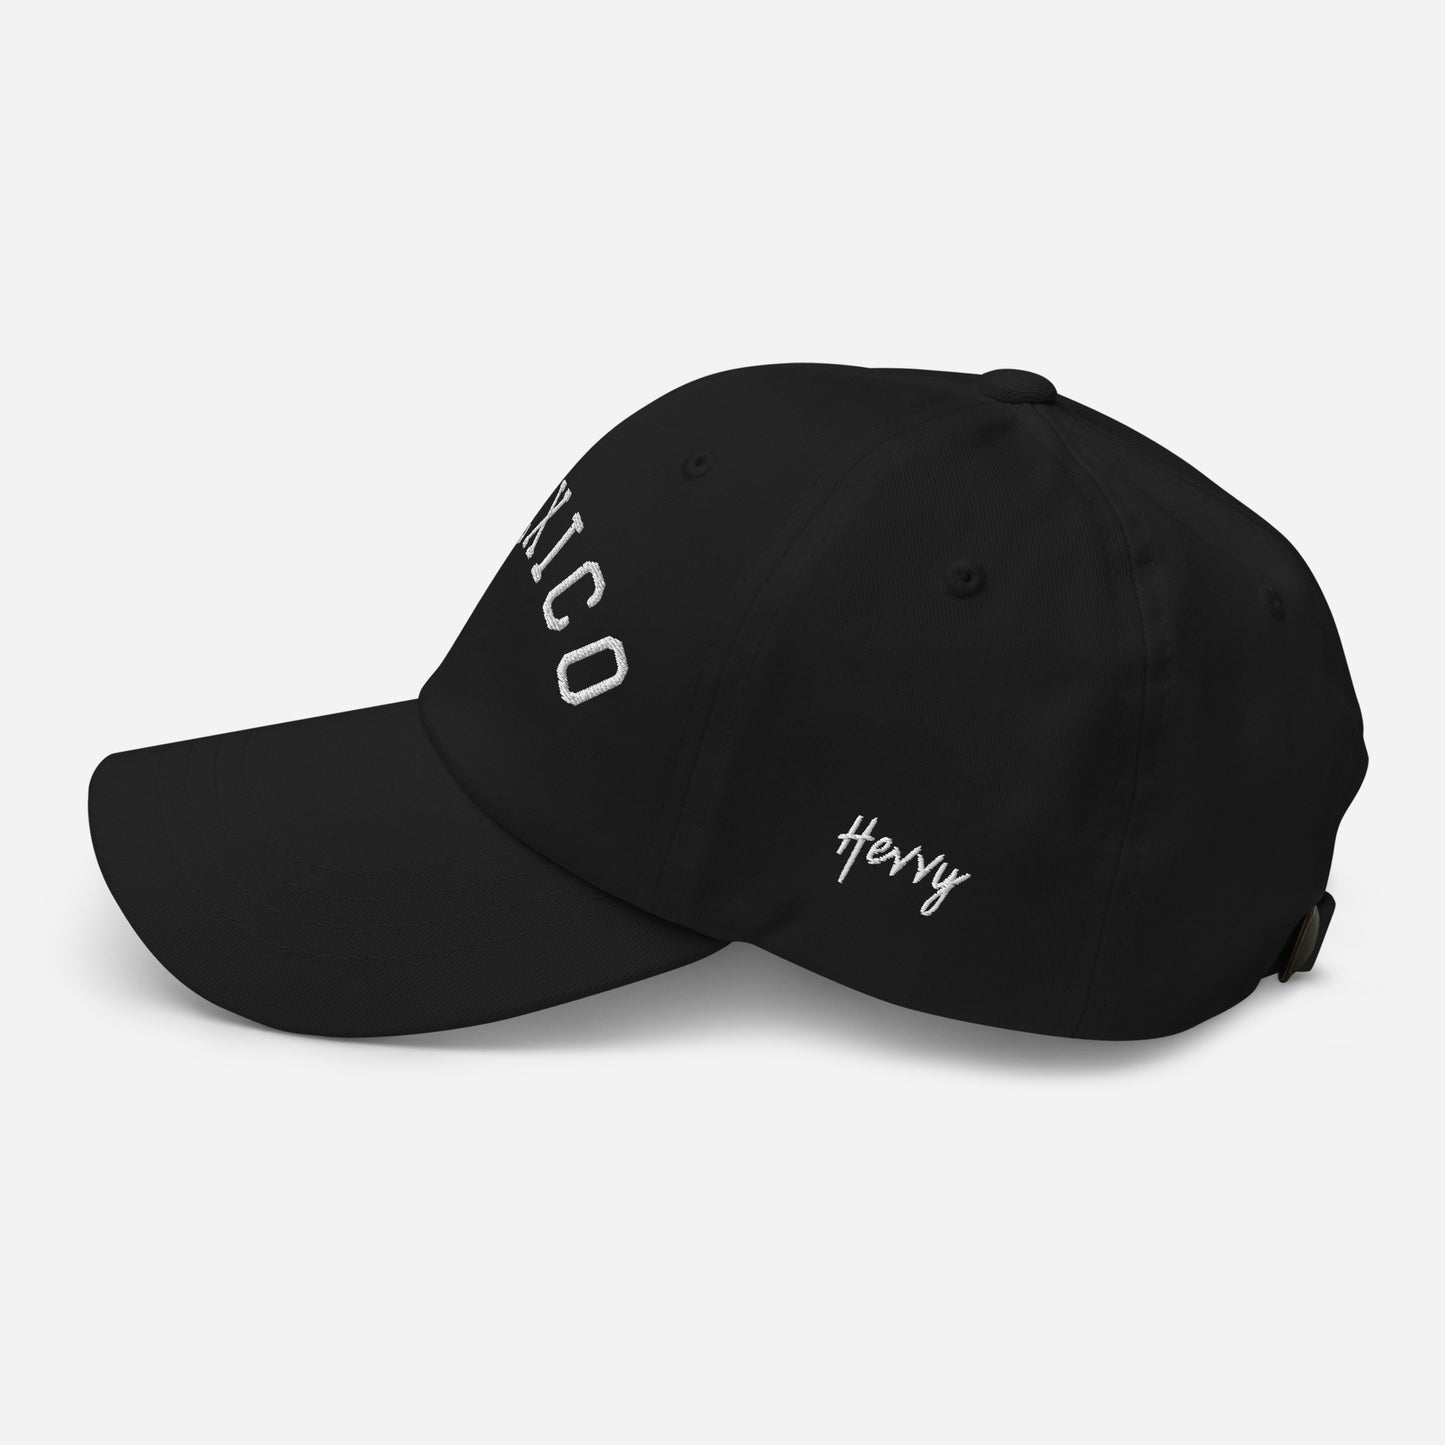 New Mexico Arch Dad Hat